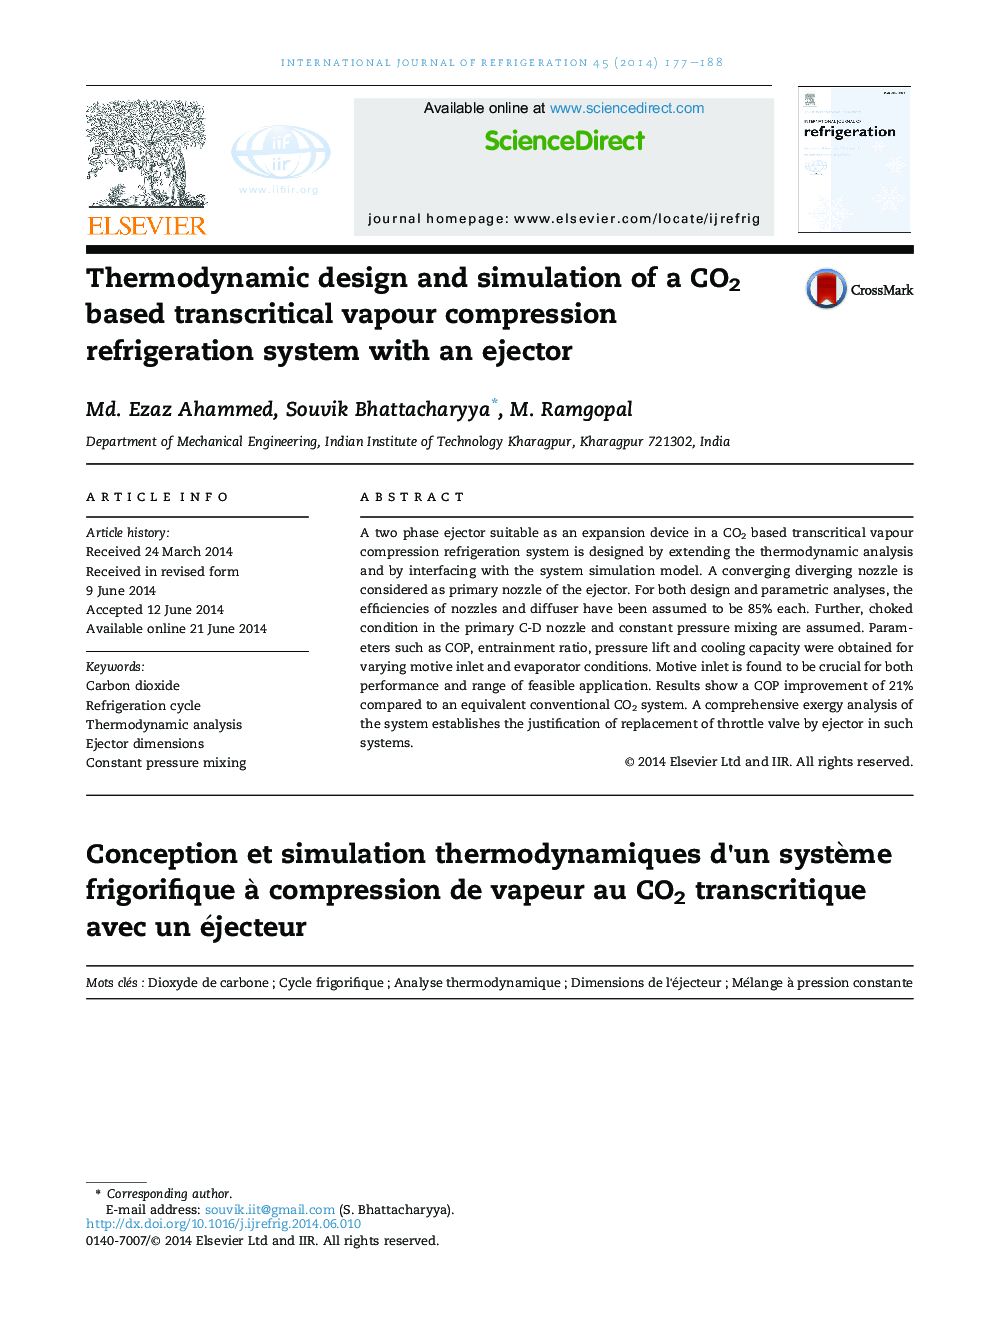 Thermodynamic design and simulation of a CO2 based transcritical vapour compression refrigeration system with an ejector